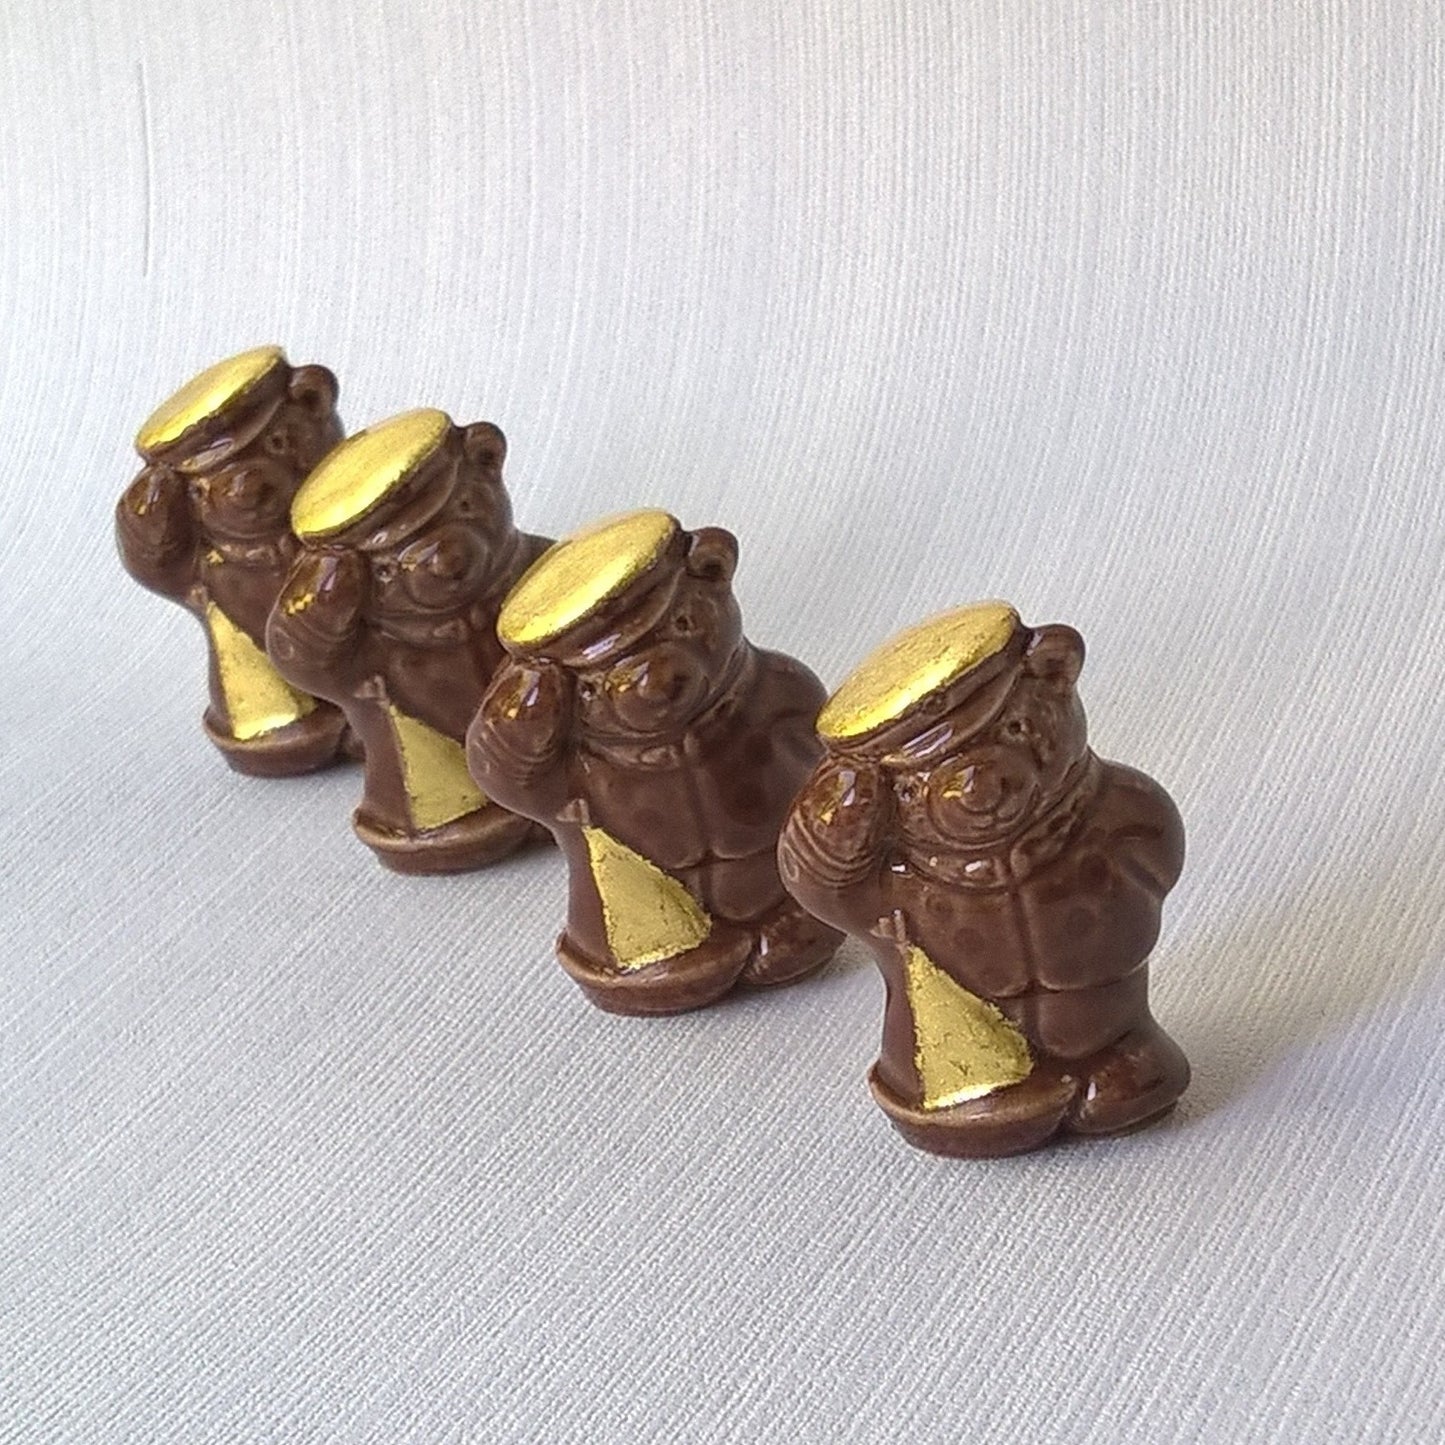 Vintage ceramic bears refreshed with pure gold leaf gilding 